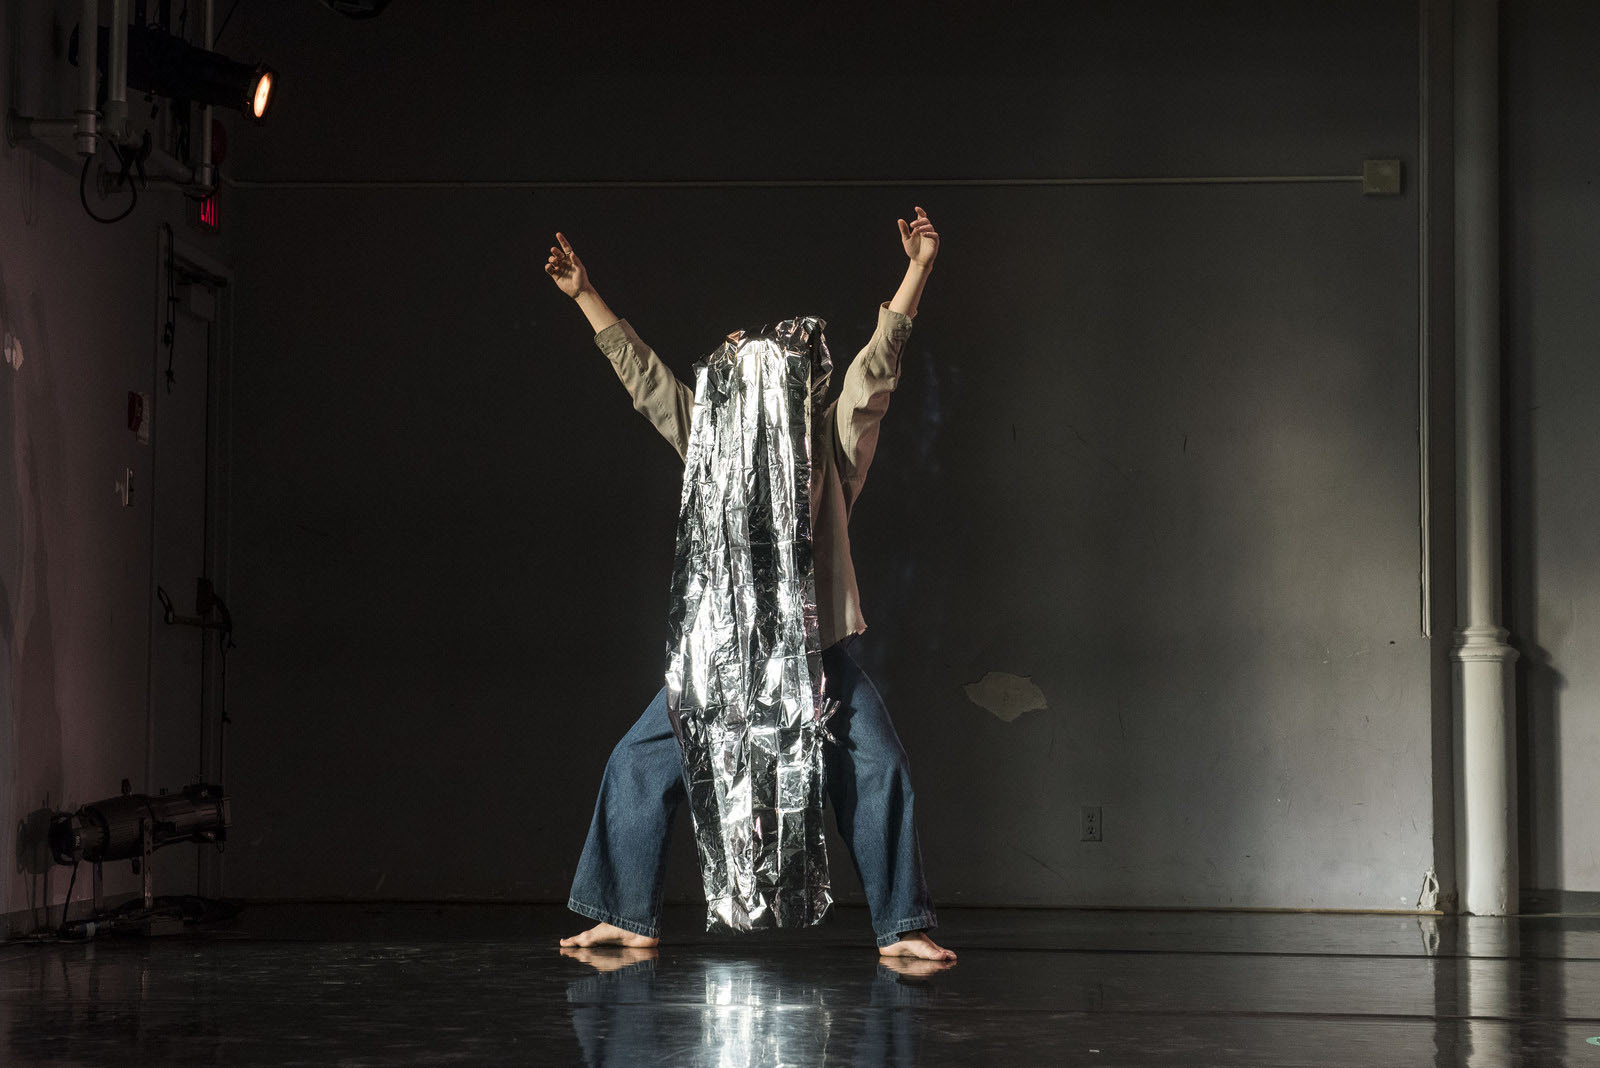 Performer standing with shiny fabric over their head.